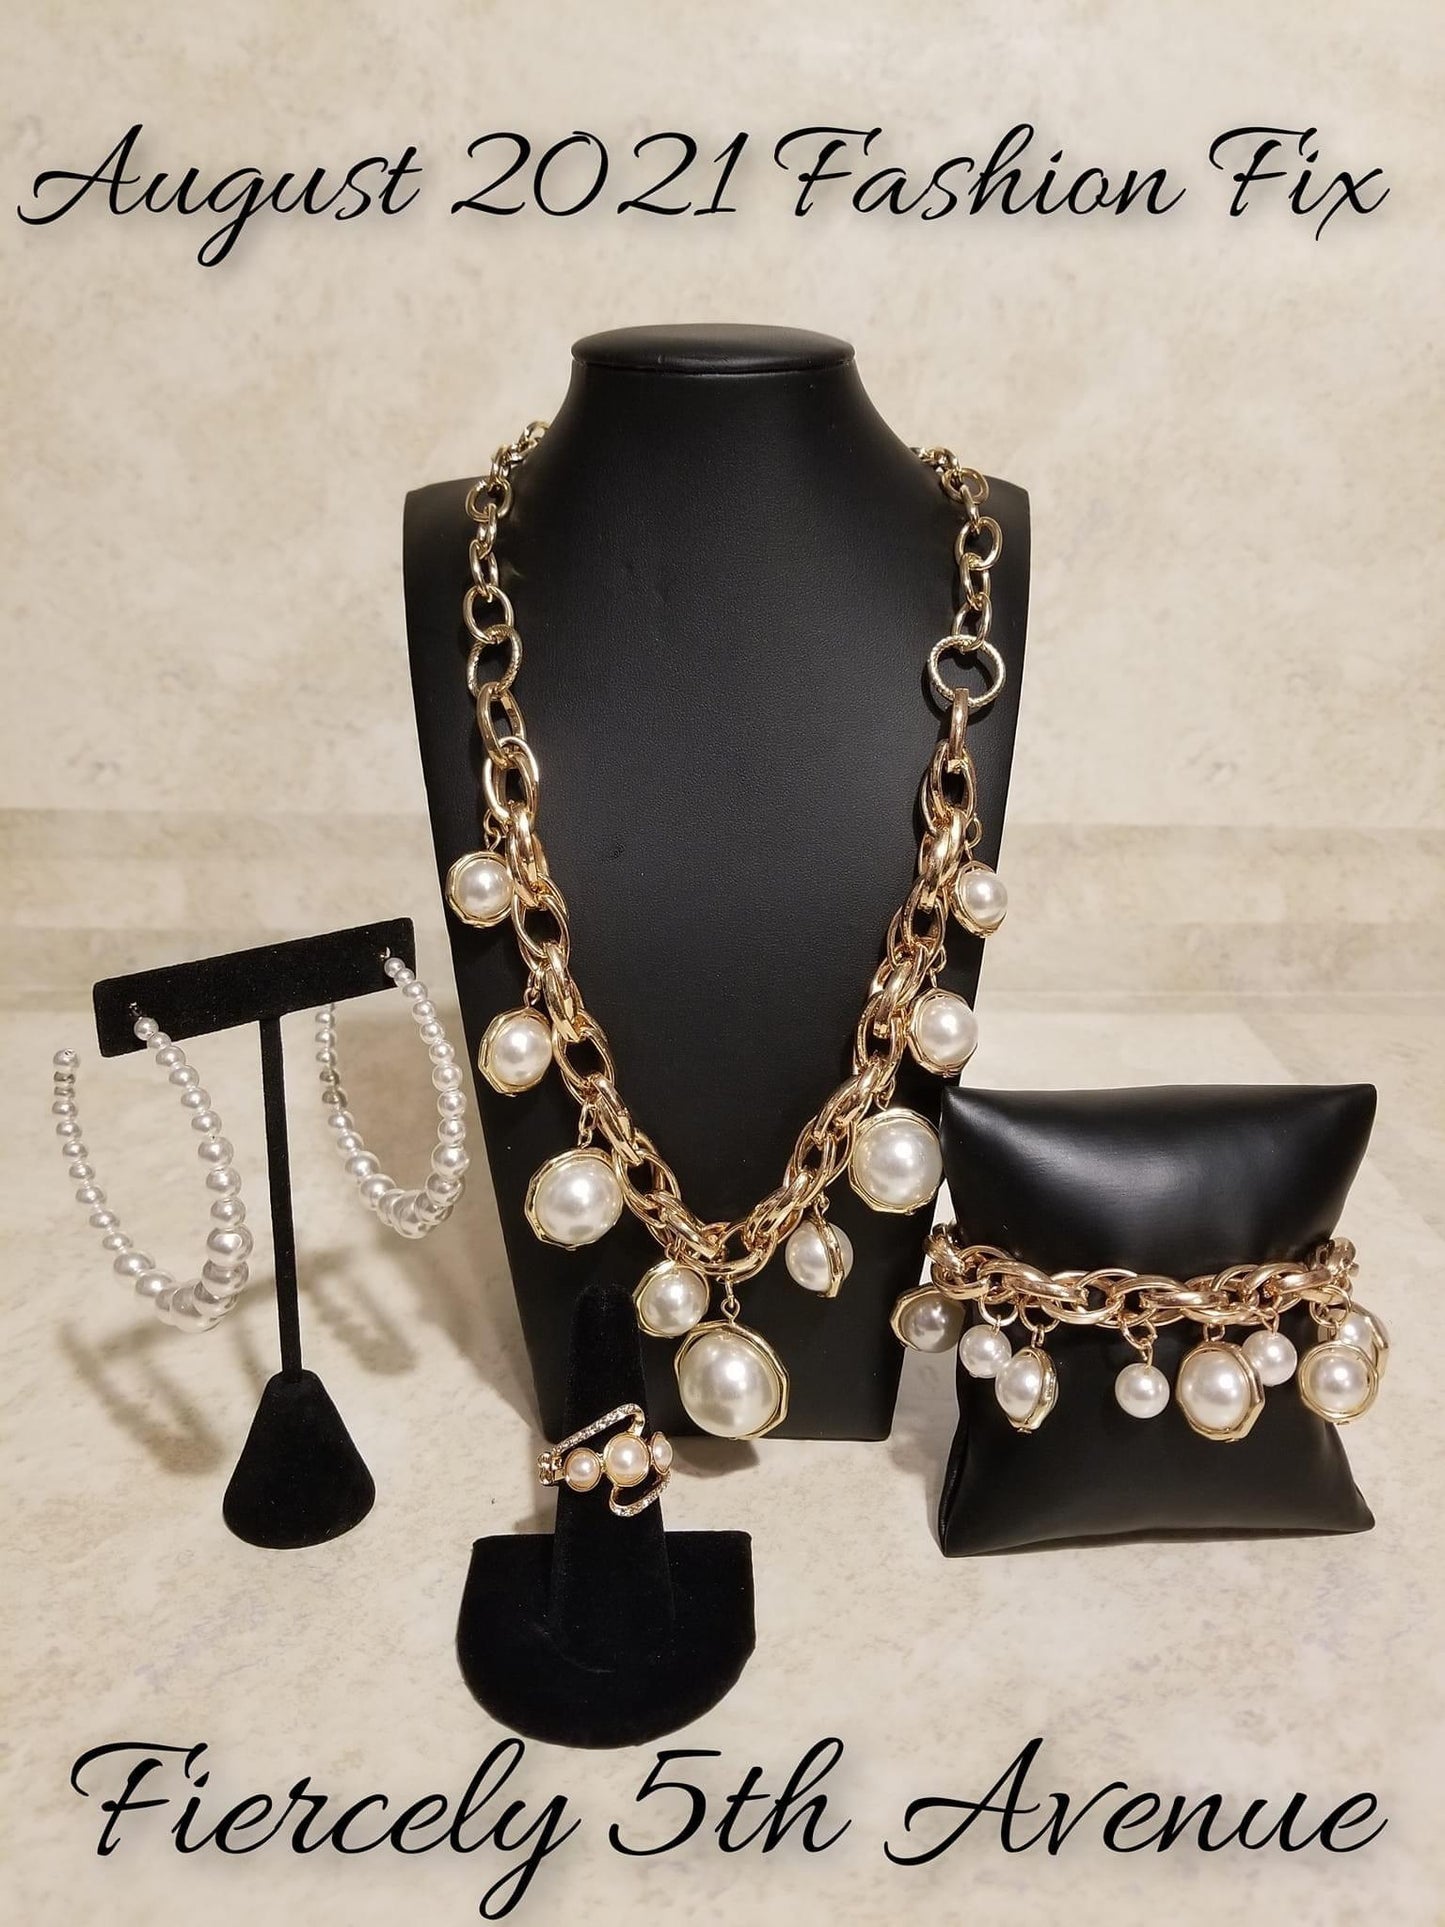 Paparazzi Accessories Fiercely 5th Avenue: FF August 2021 The styles featured in the Fiercely 5th Avenue collection are exactly what you would expect with a name like that: Sleek, classy, metallic designs that you’d find on the streets of New York. The ac